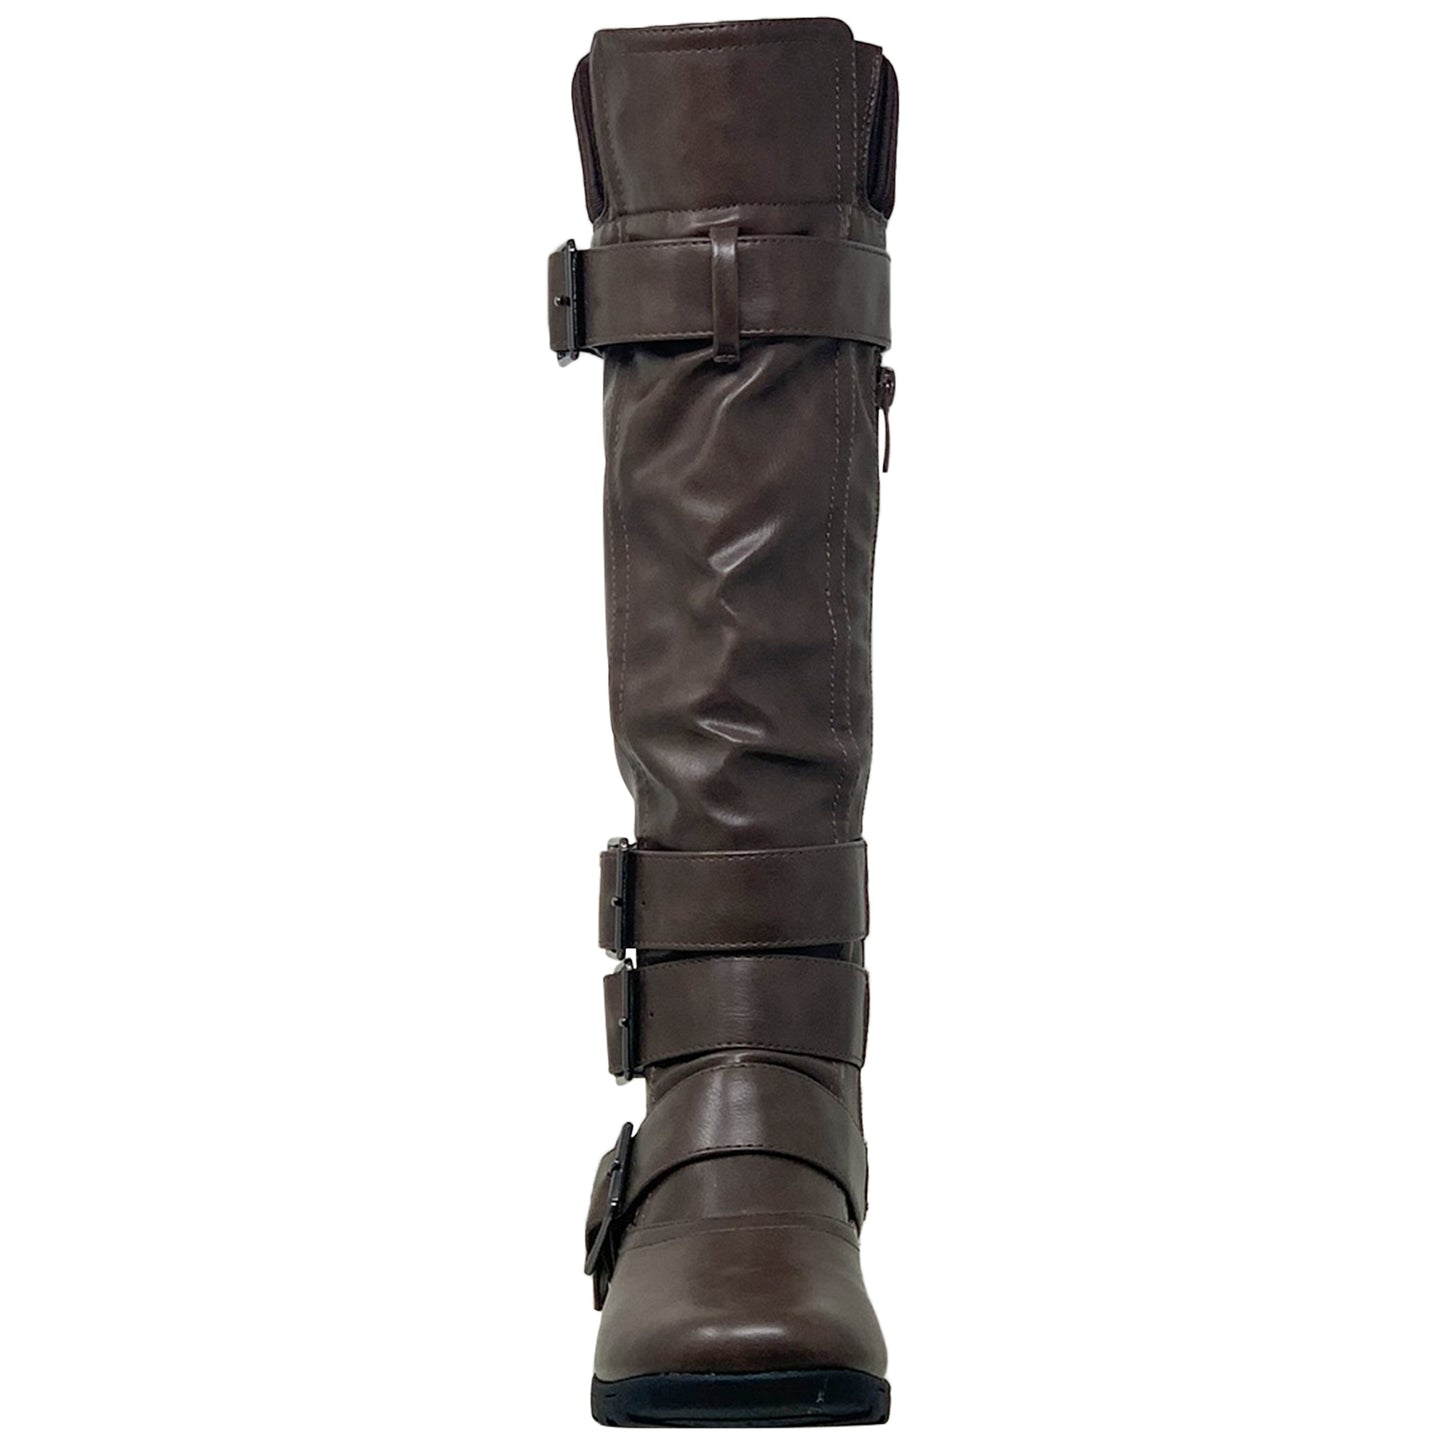 Generation Y Women's Knee High Boots Strappy Buckles Combat Taupe